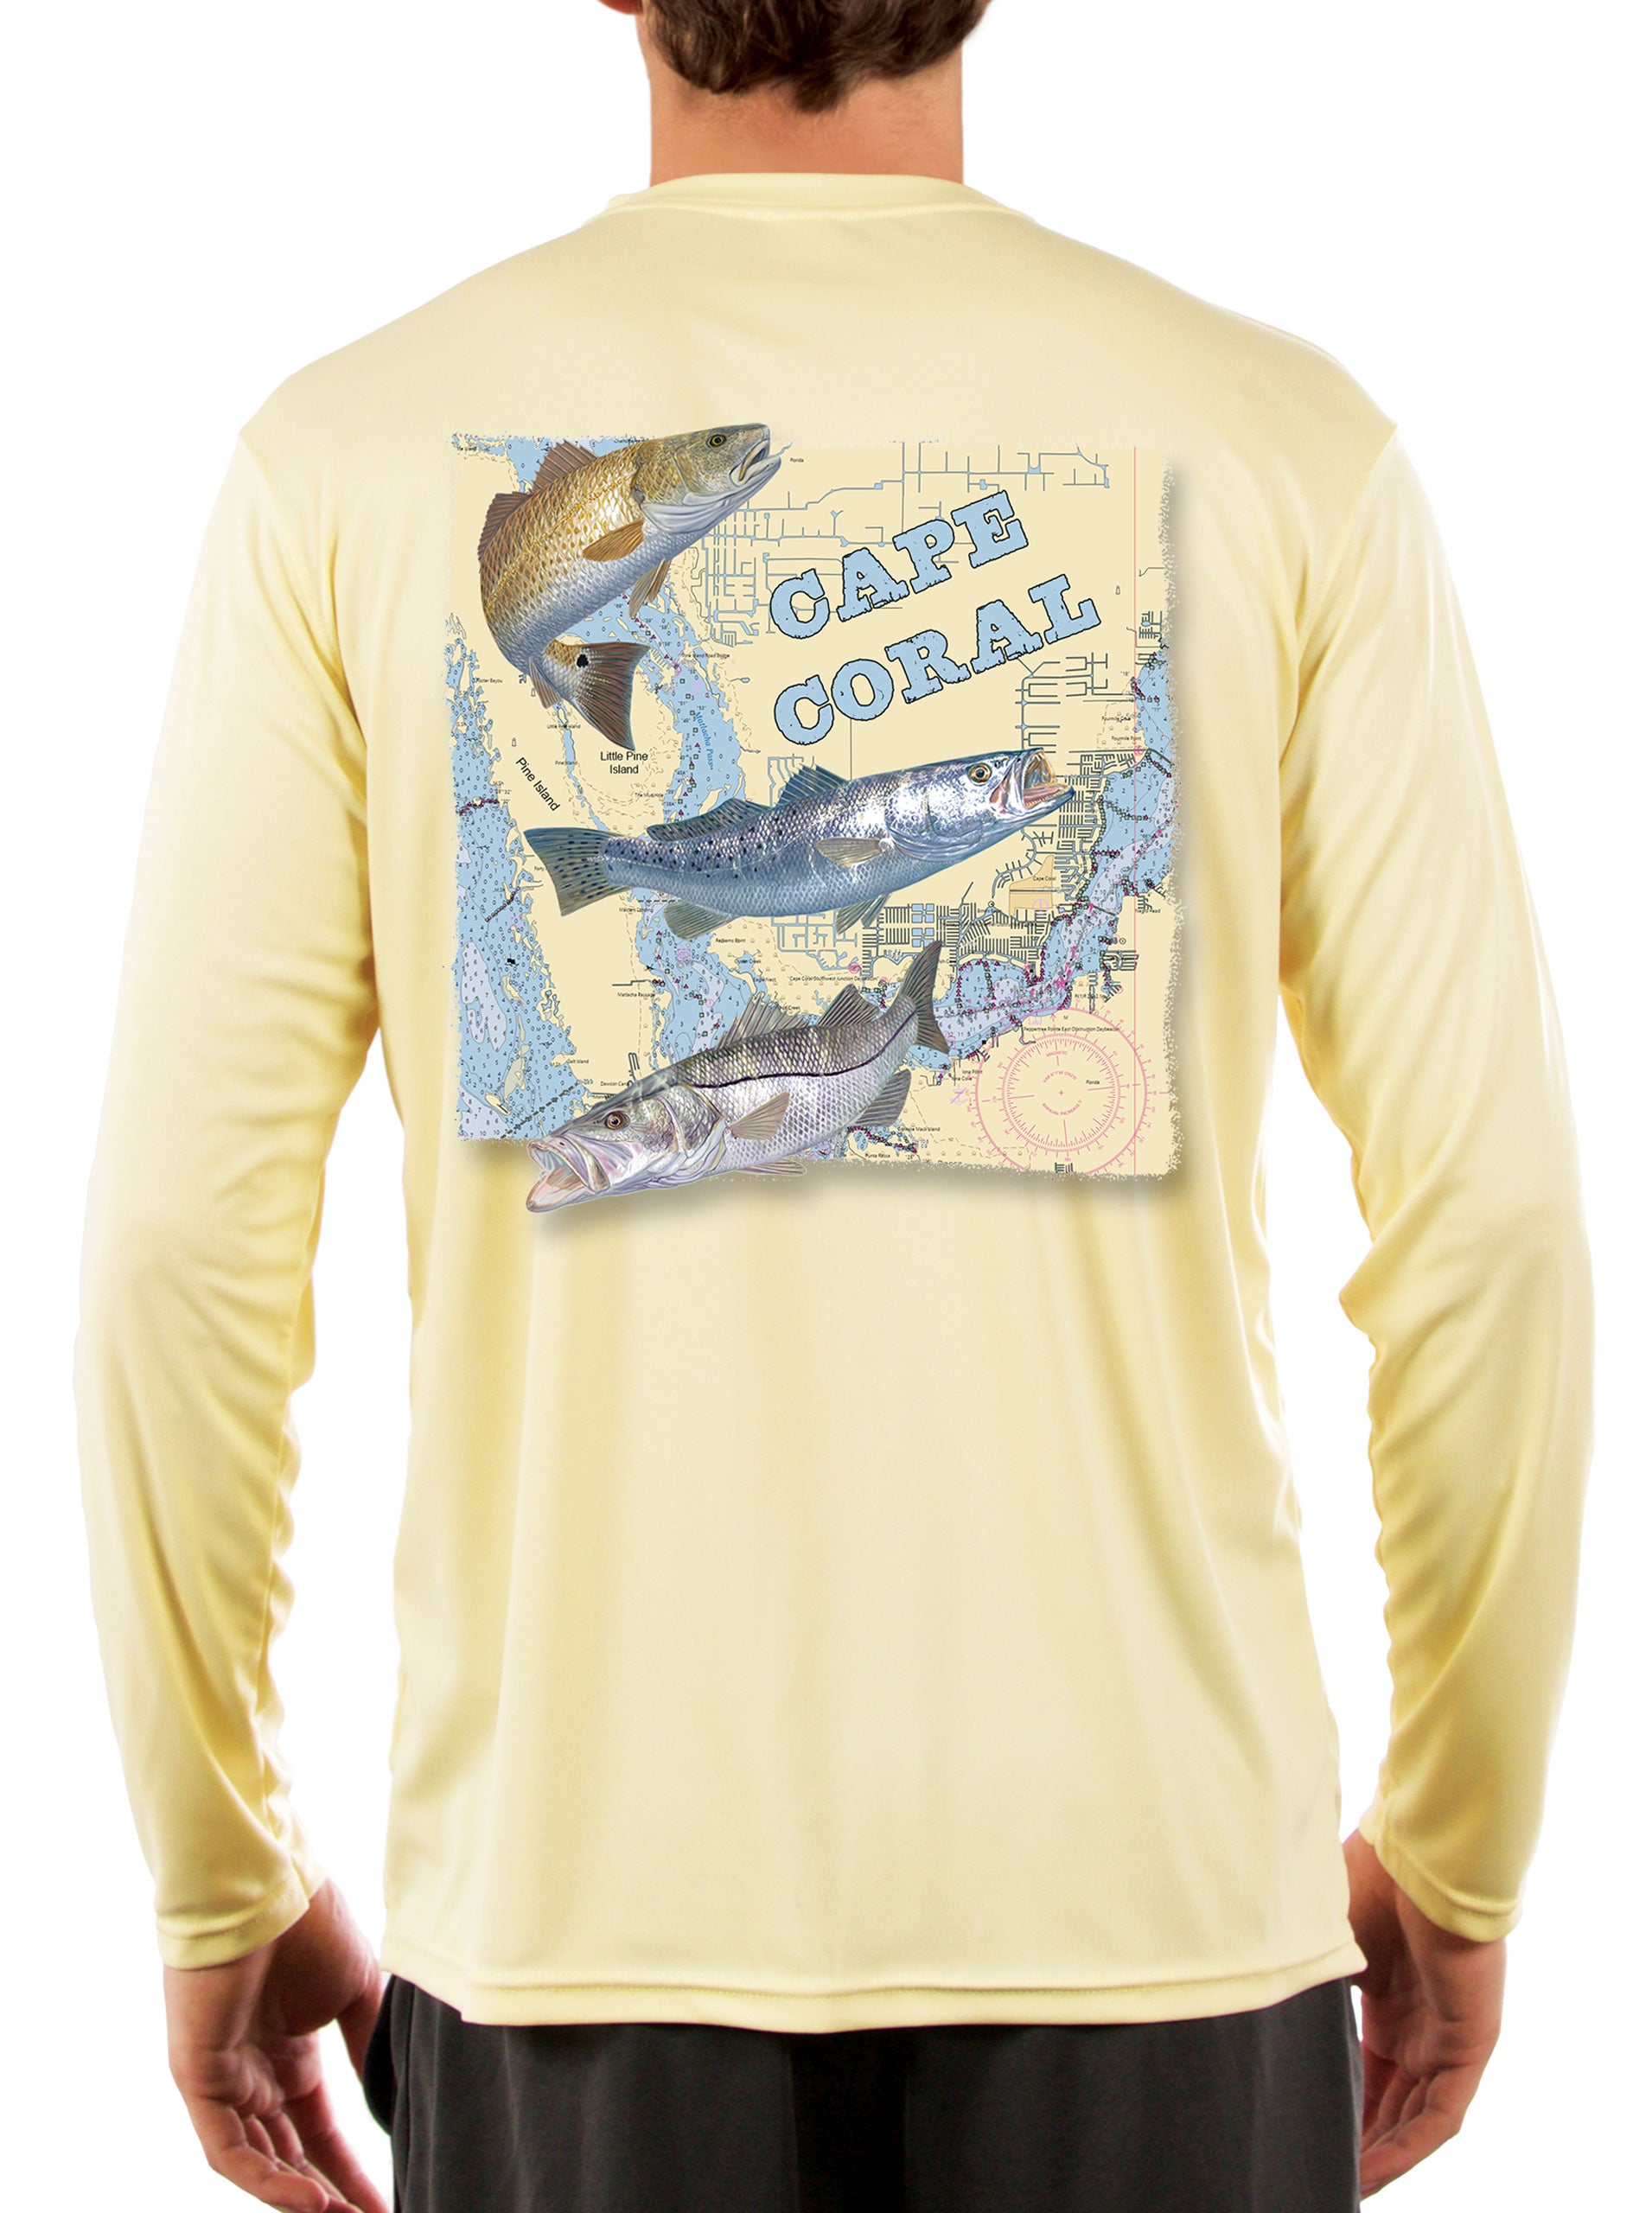 Cape Coral Florida Fishing Shirts for Men Redfish Speckled Sea Trout Snook Red Drum Seatrout 3XL / Yellow